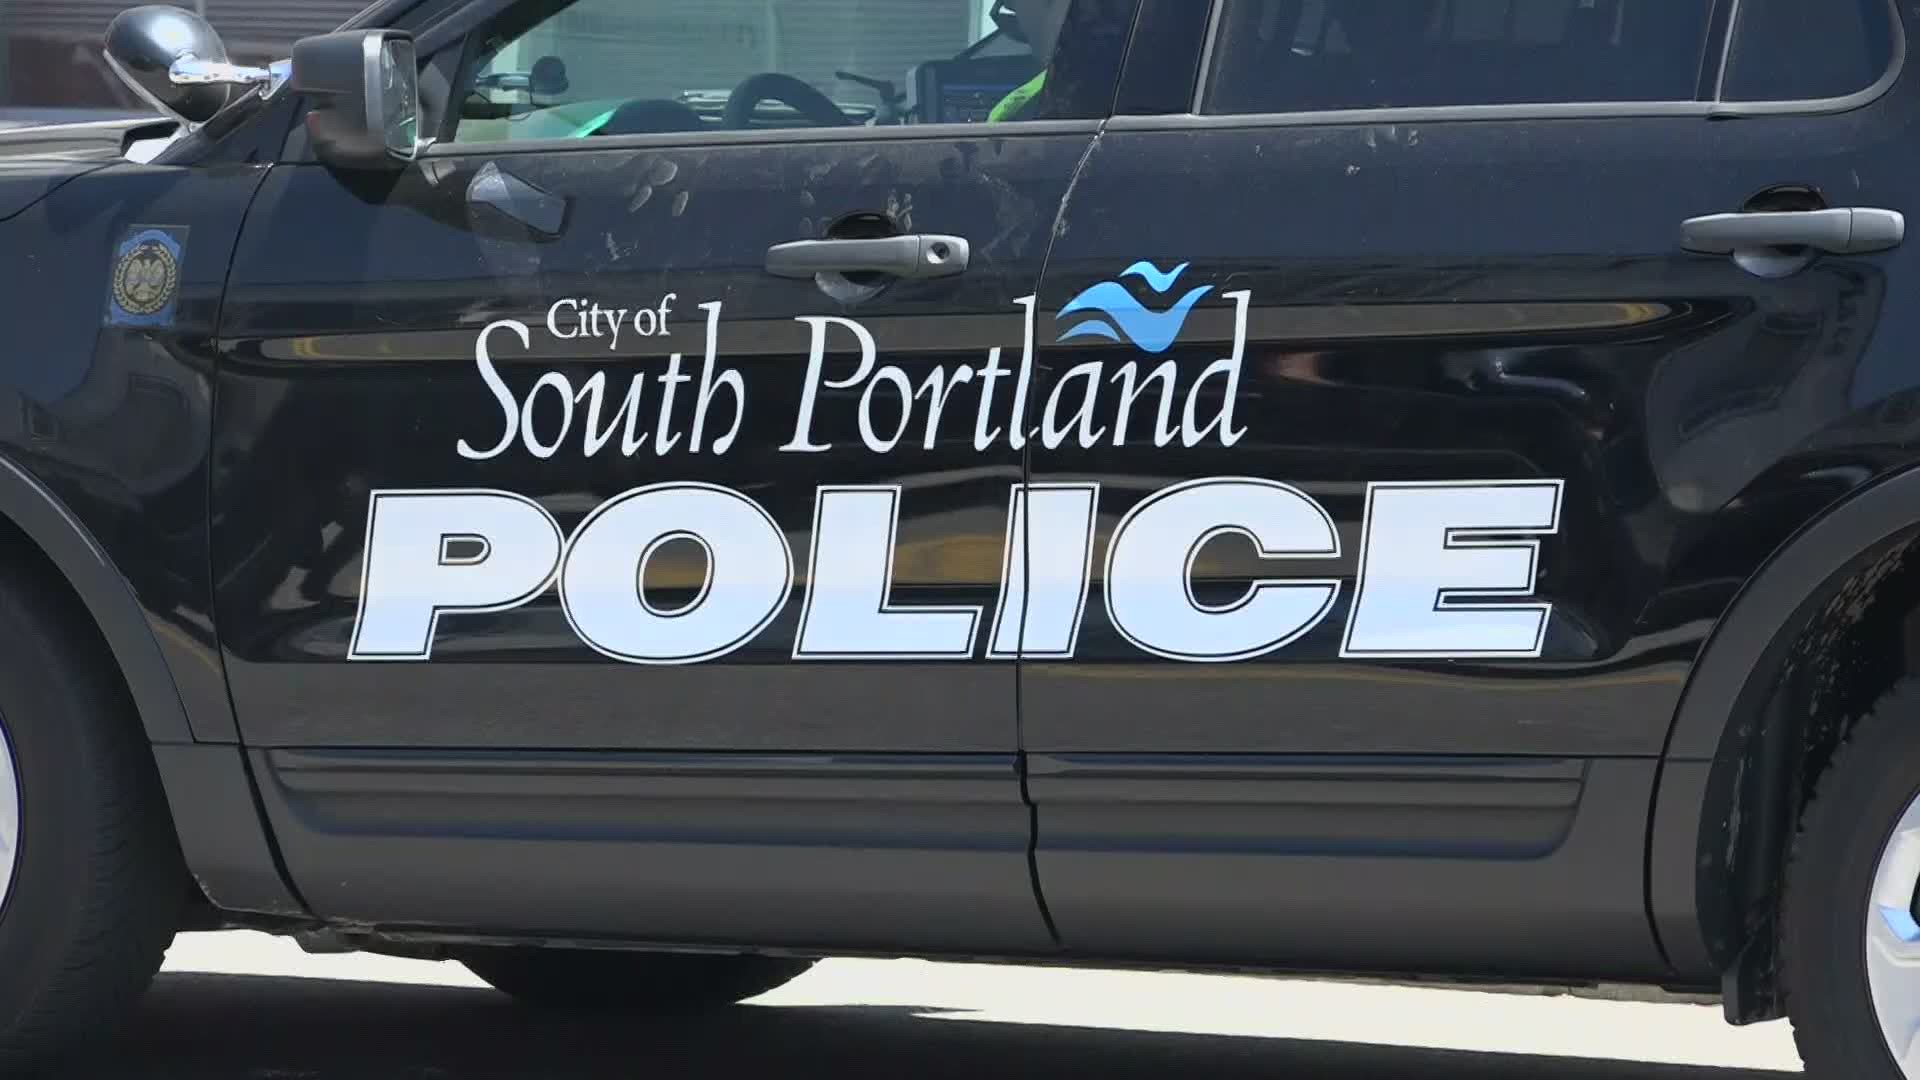 South Portland city leaders seek to combat racism, use police funds to create 'Human Rights Commission'